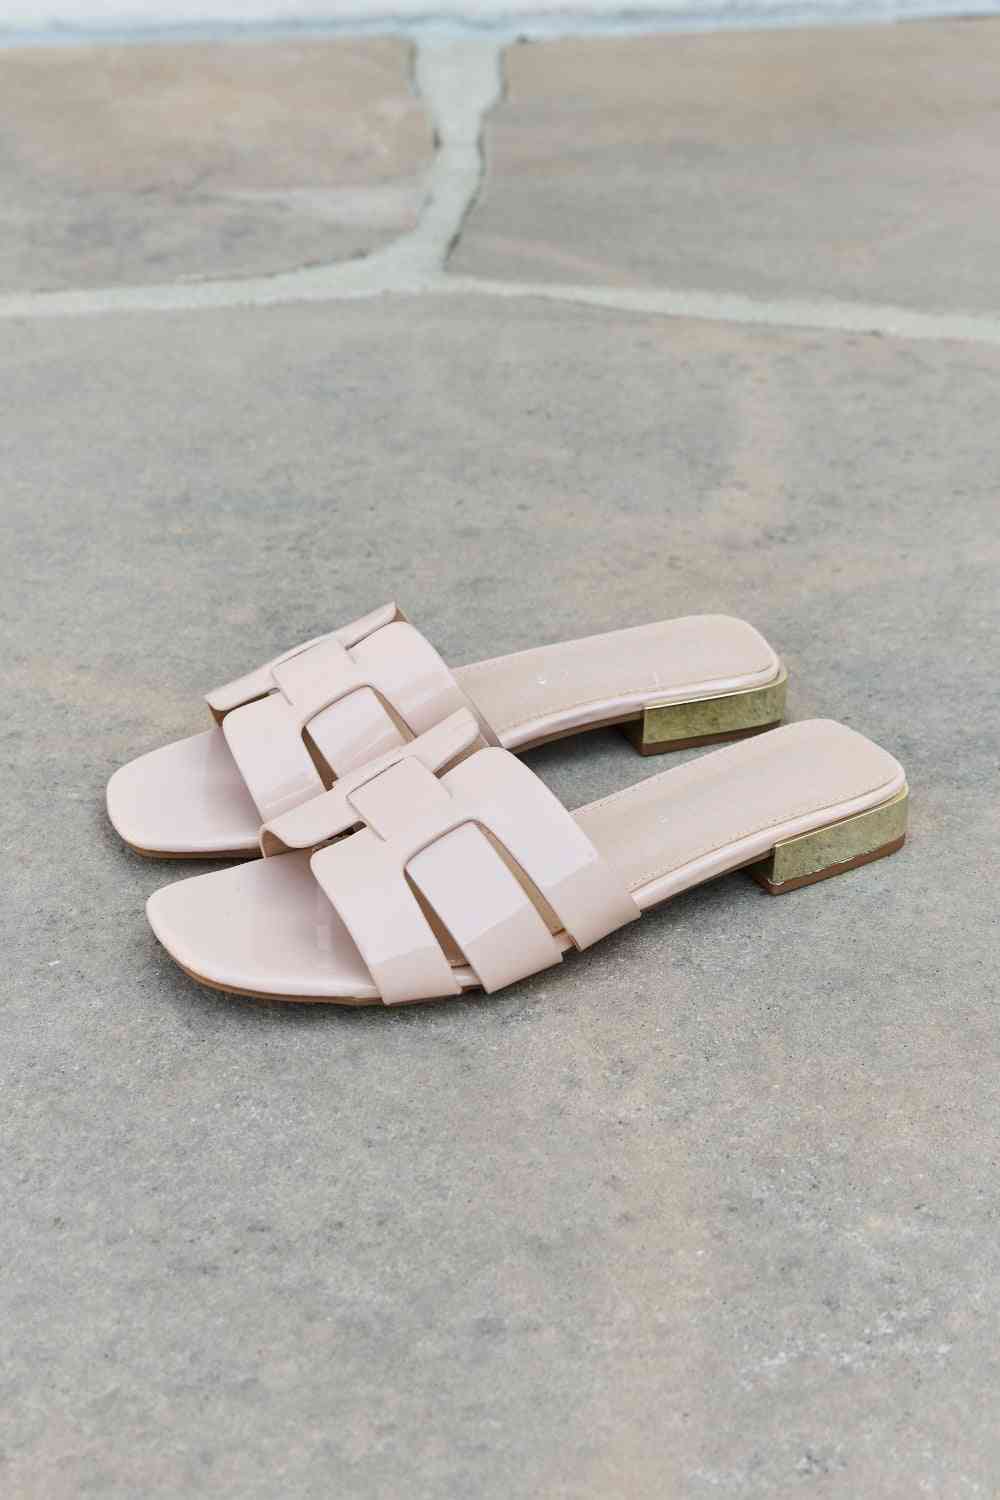 Walk It Out Slide Sandals in Nude - Accessories - Shoes - 6 - 2024